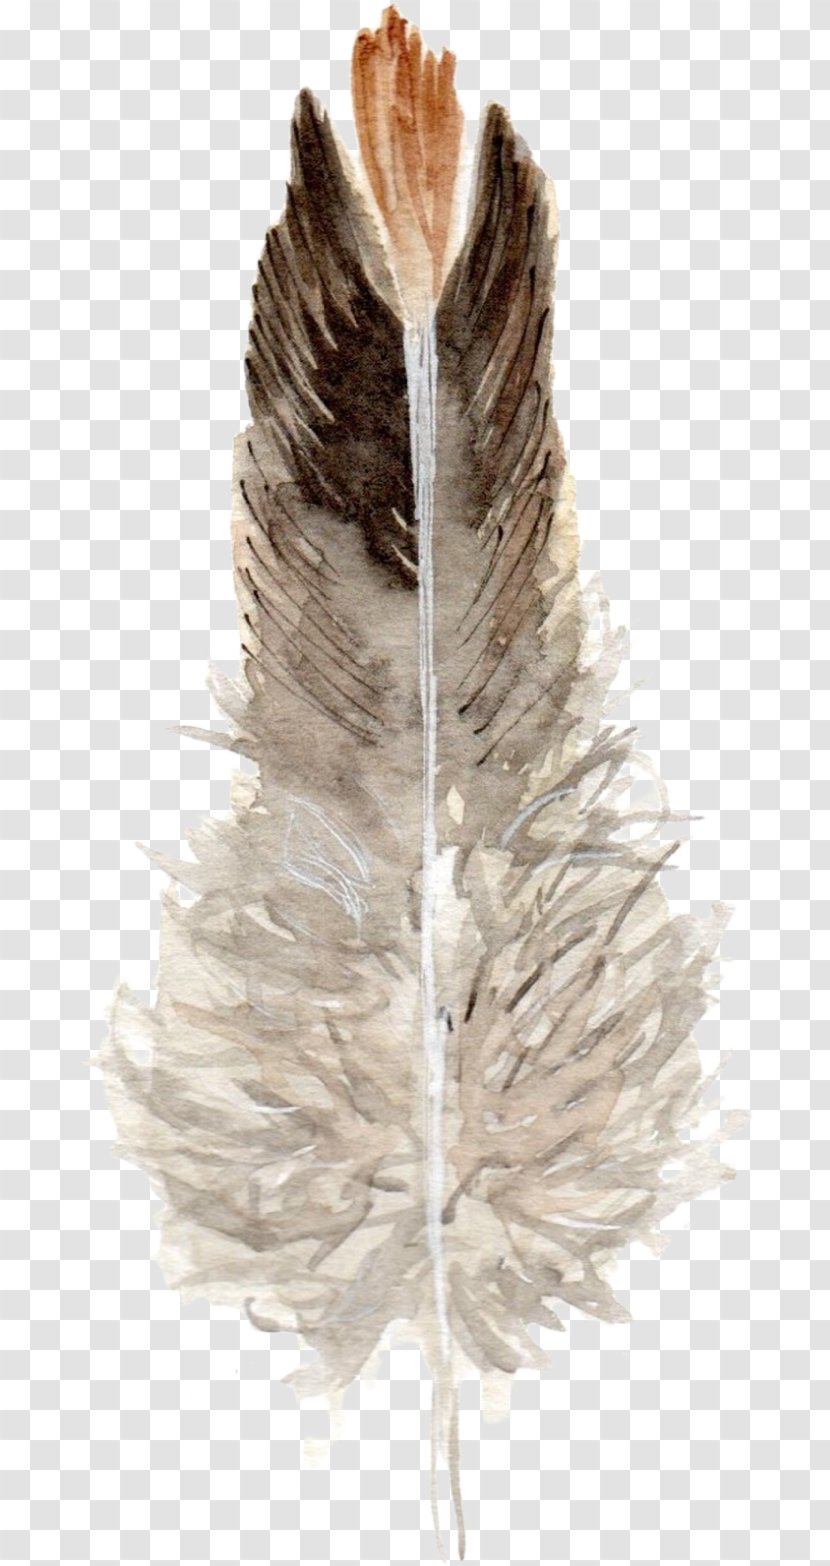 Feather - Feathers Transparent PNG